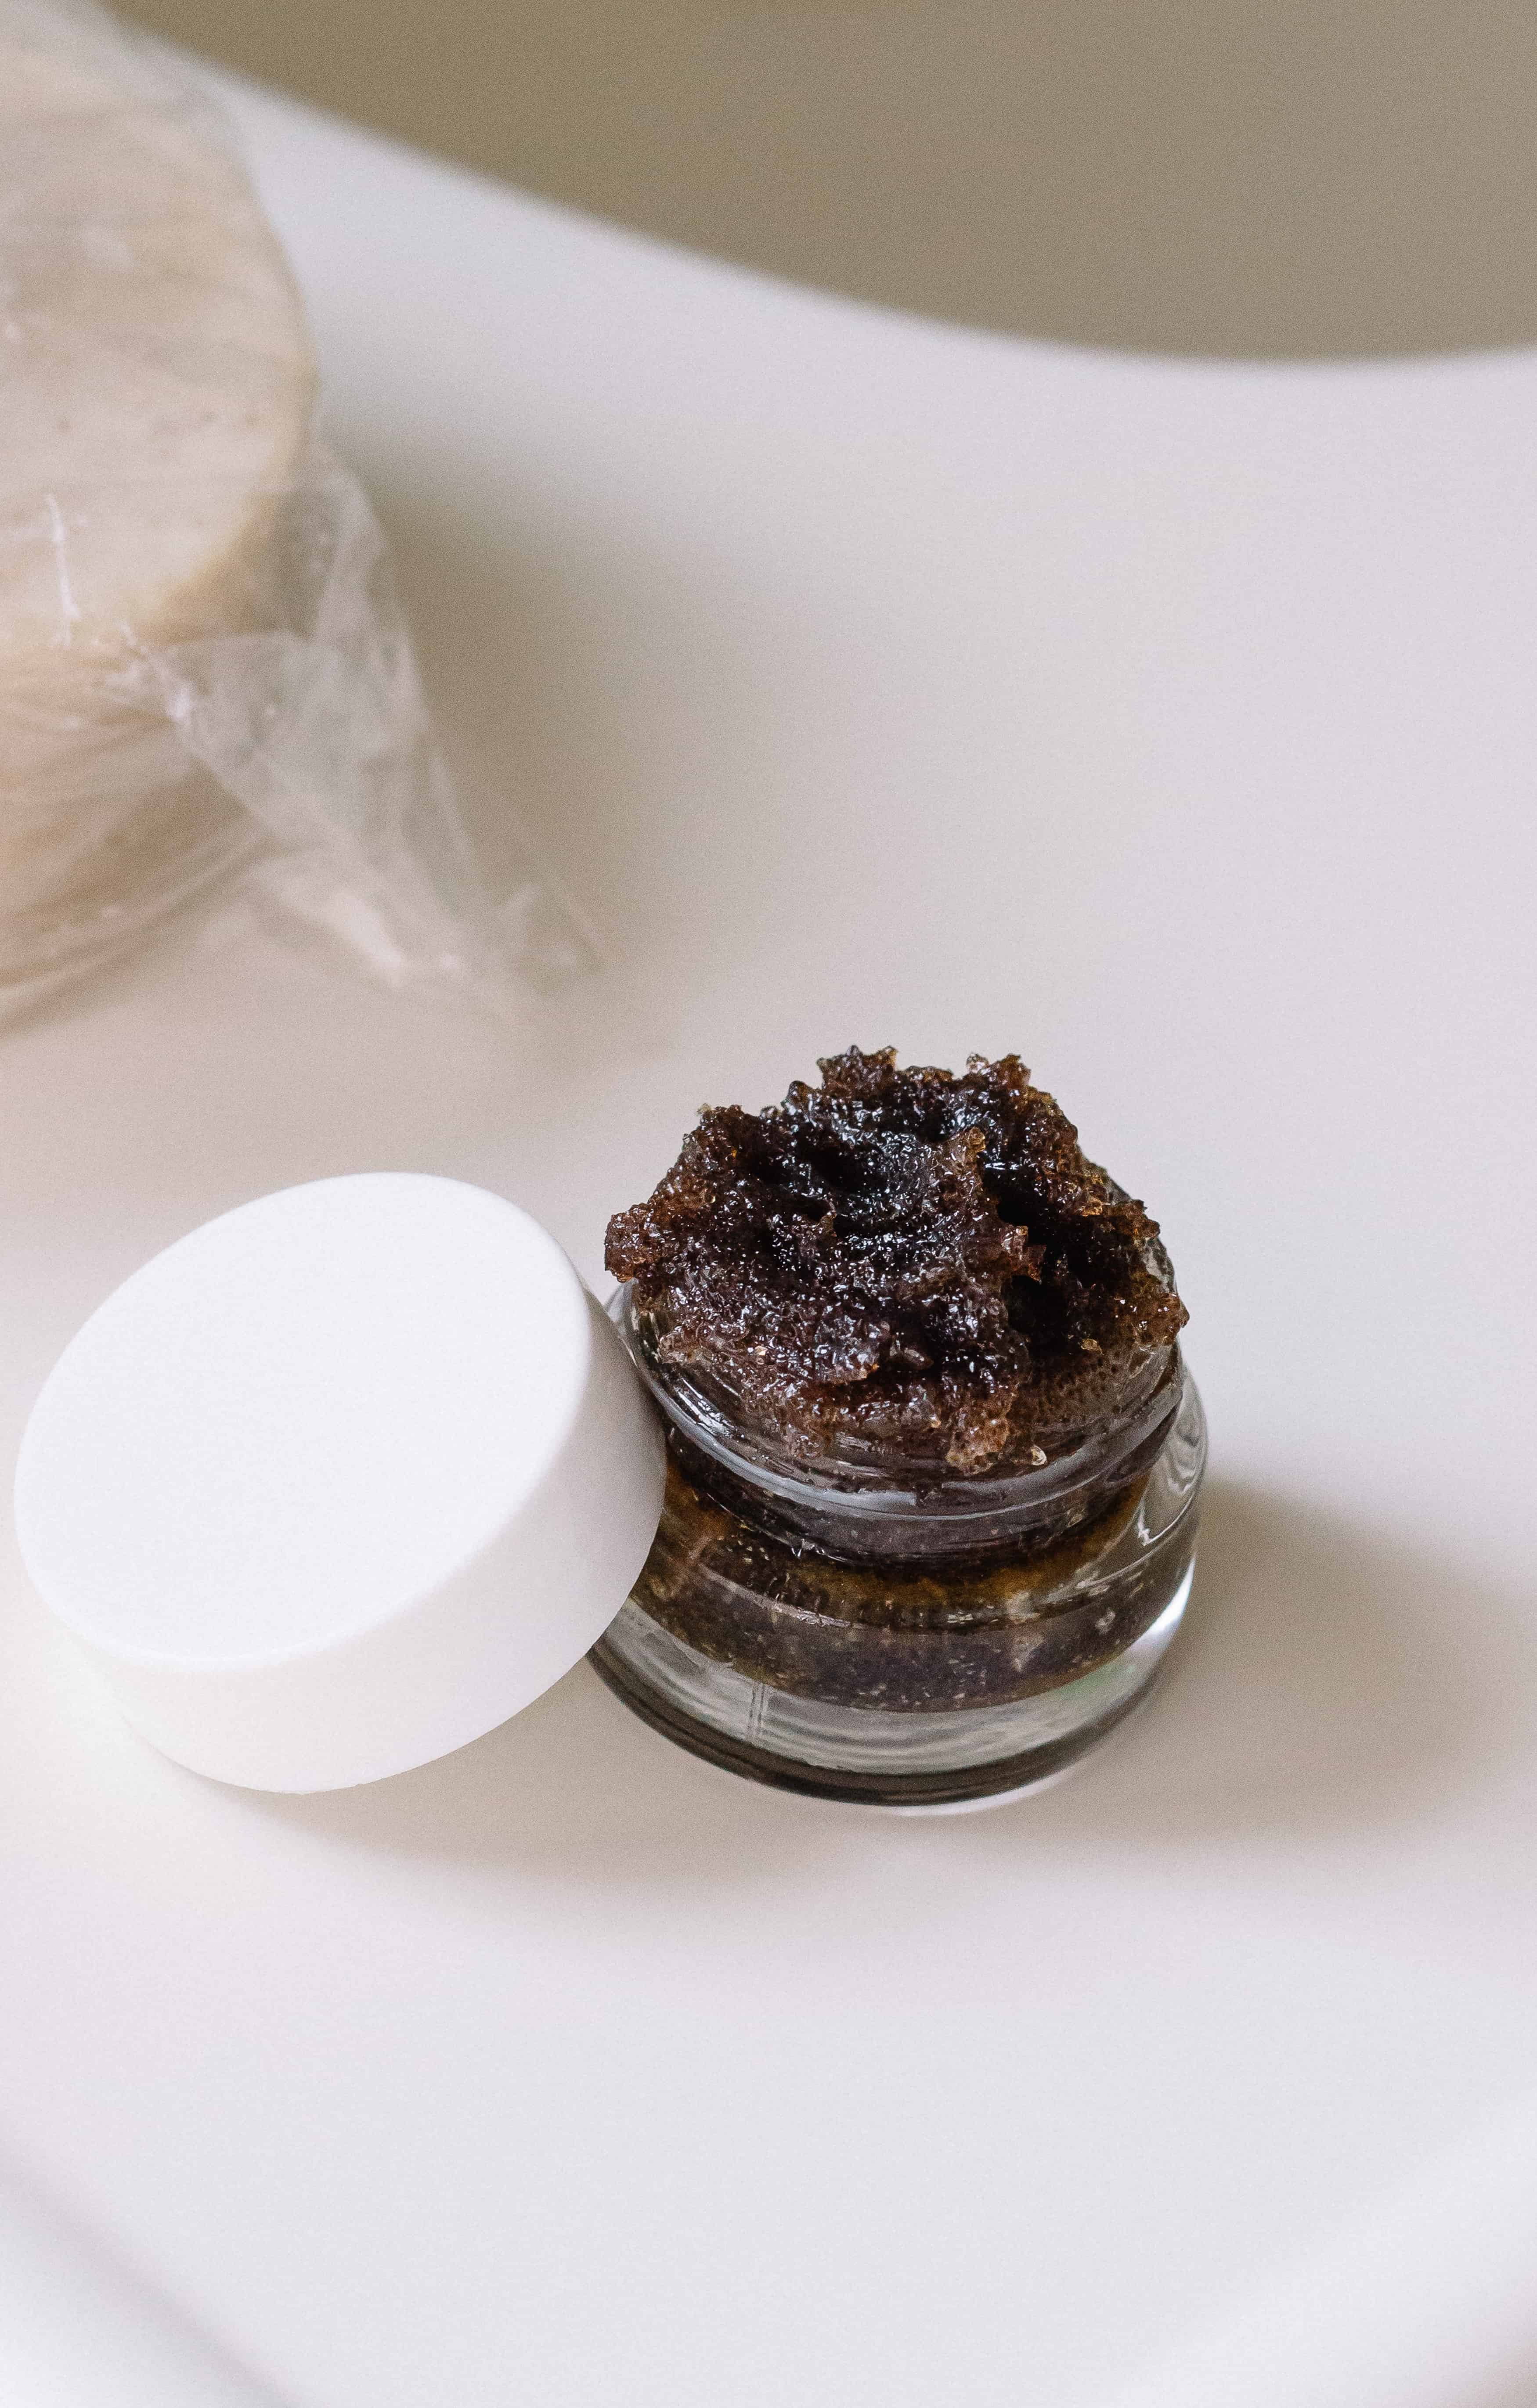 A 5-minute diy cocoa lip sugar scrub that is so easy to make. It’s the perfect exfoliator for dry lips this winter season being that chocolate is rich in antioxidants. (Click here for the homemade recipe!)